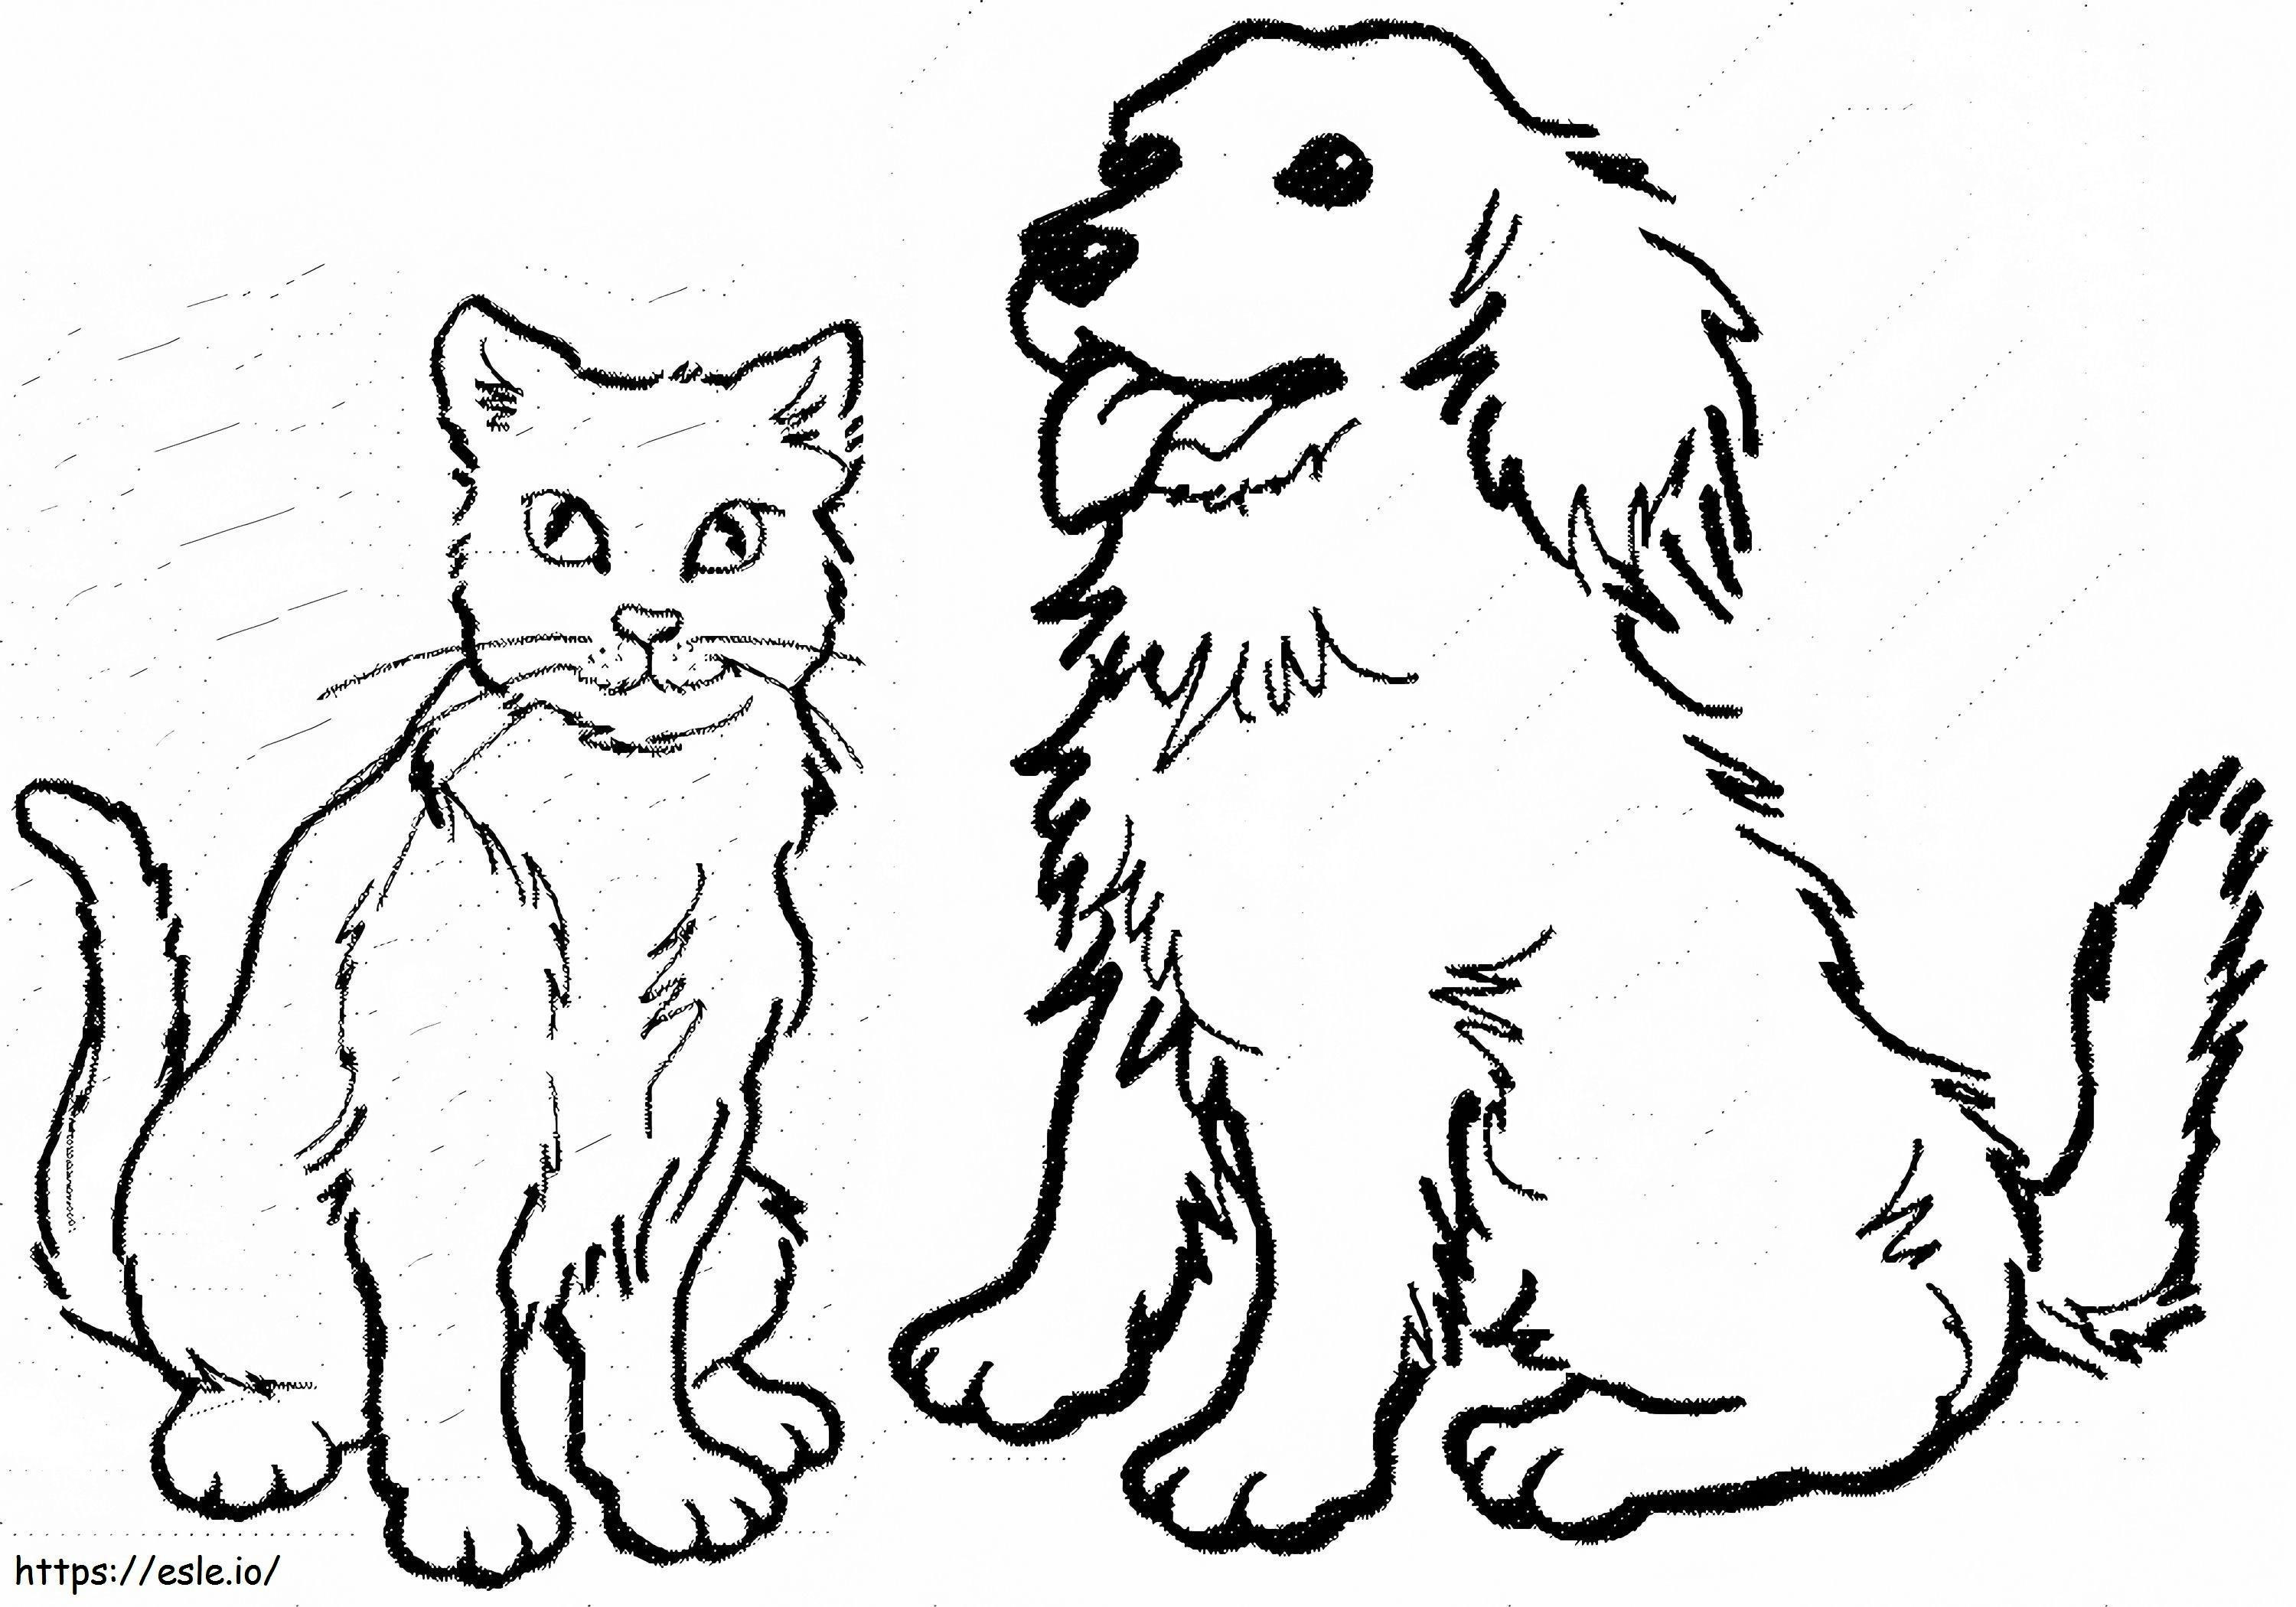 Normal Dog And Cat coloring page